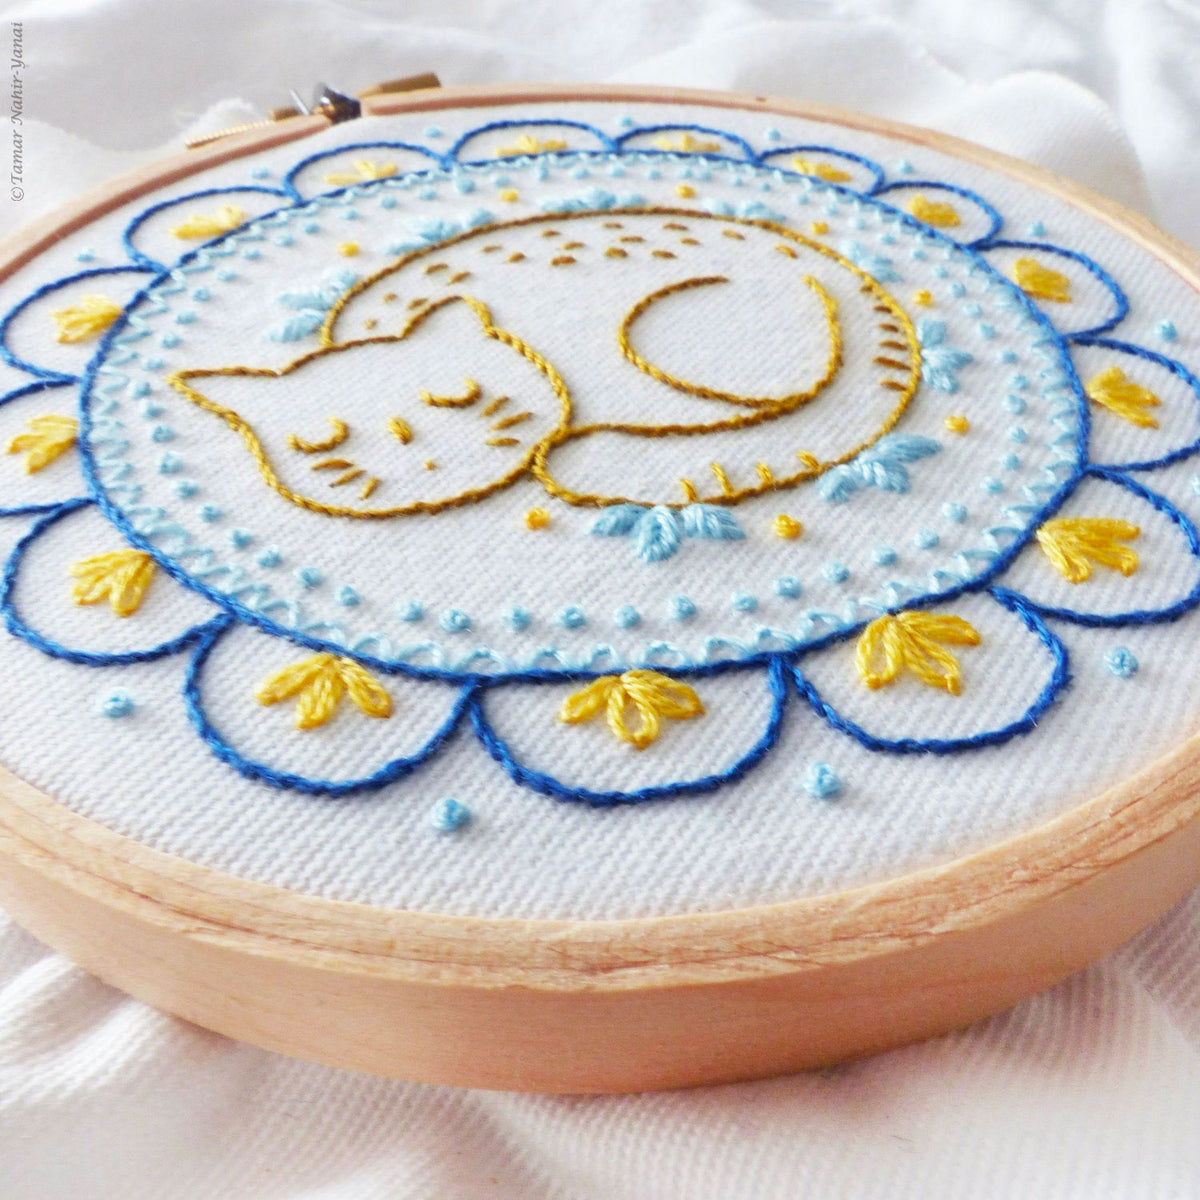 Povitrulya Cat Embroidery Kit for Beginners 'Mermaid Cat' - Fun Starter Kit  for Hand Embroidery